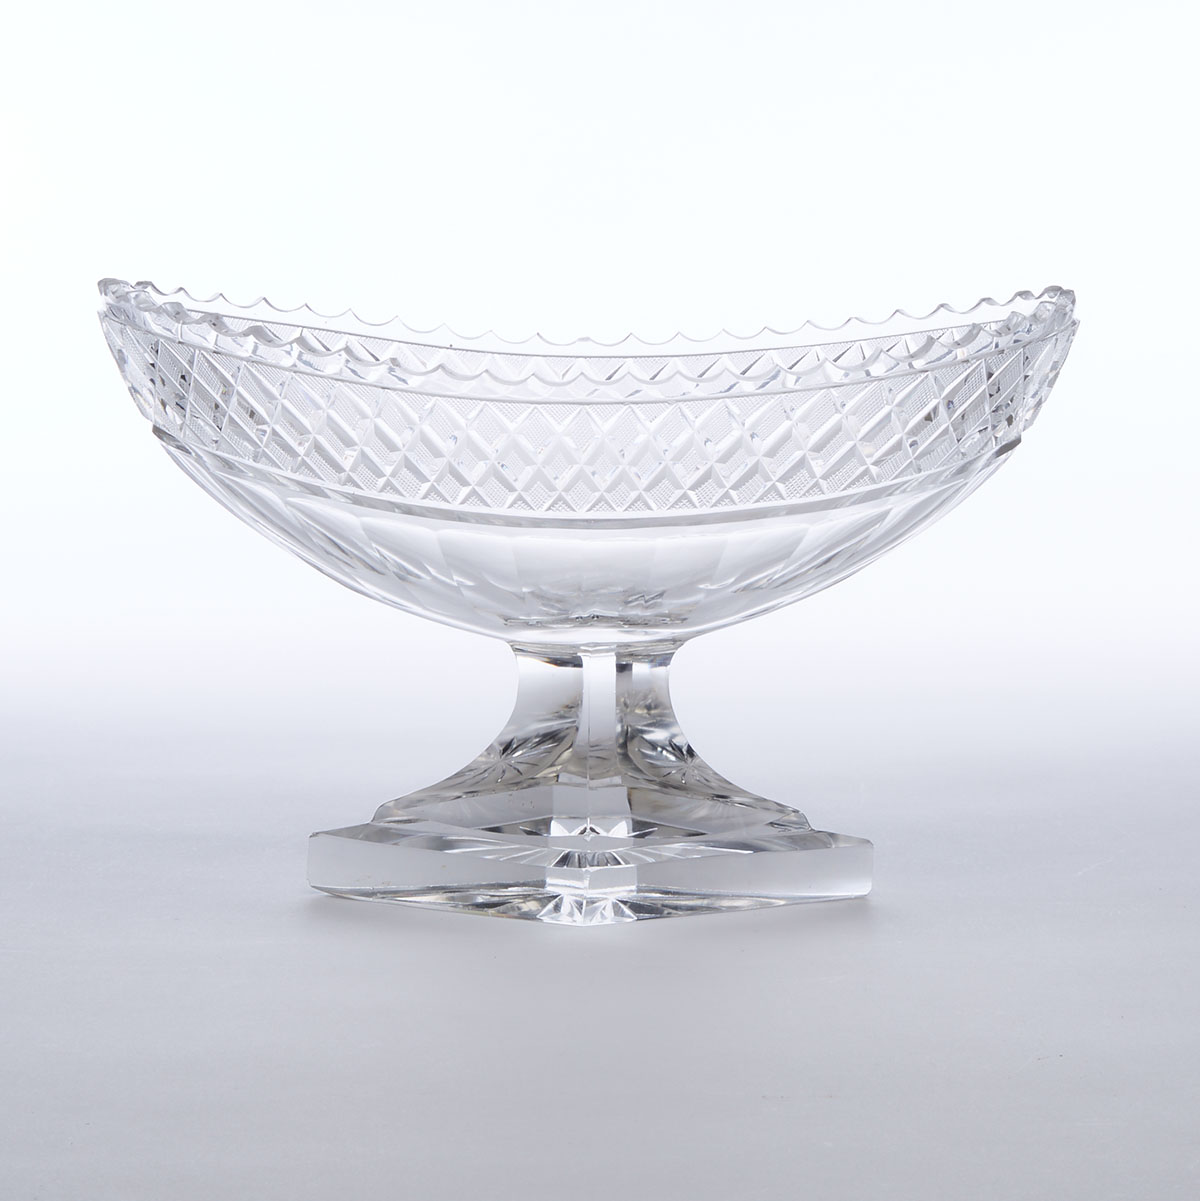 Continental Cut Glass Pedestal Footed Oval Bowl, late 19th century